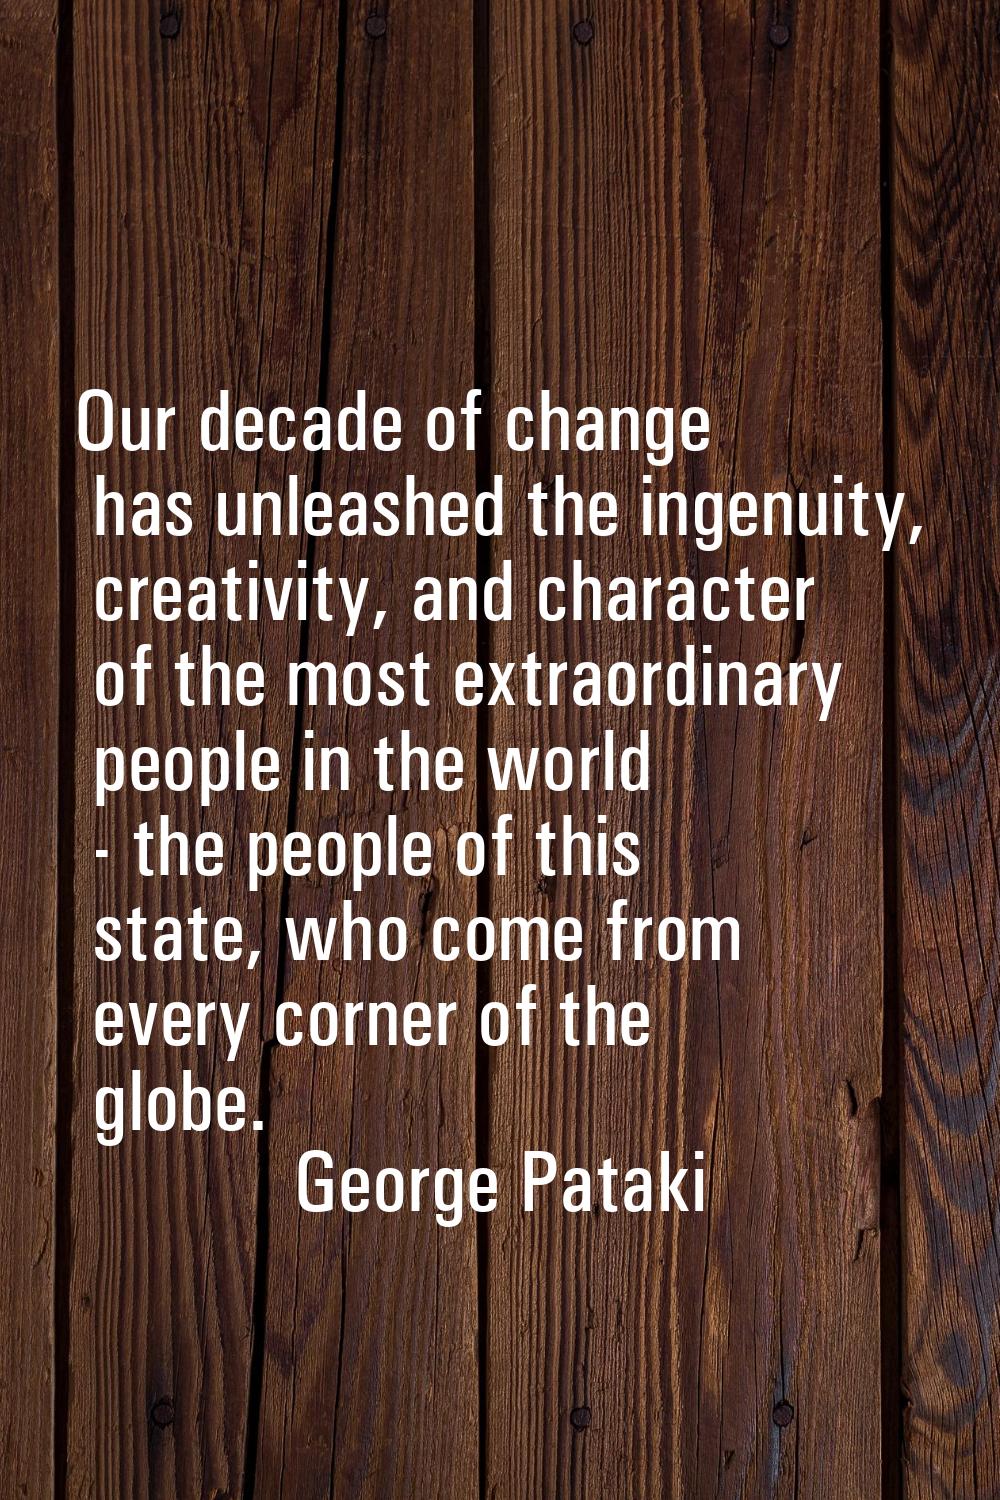 Our decade of change has unleashed the ingenuity, creativity, and character of the most extraordina